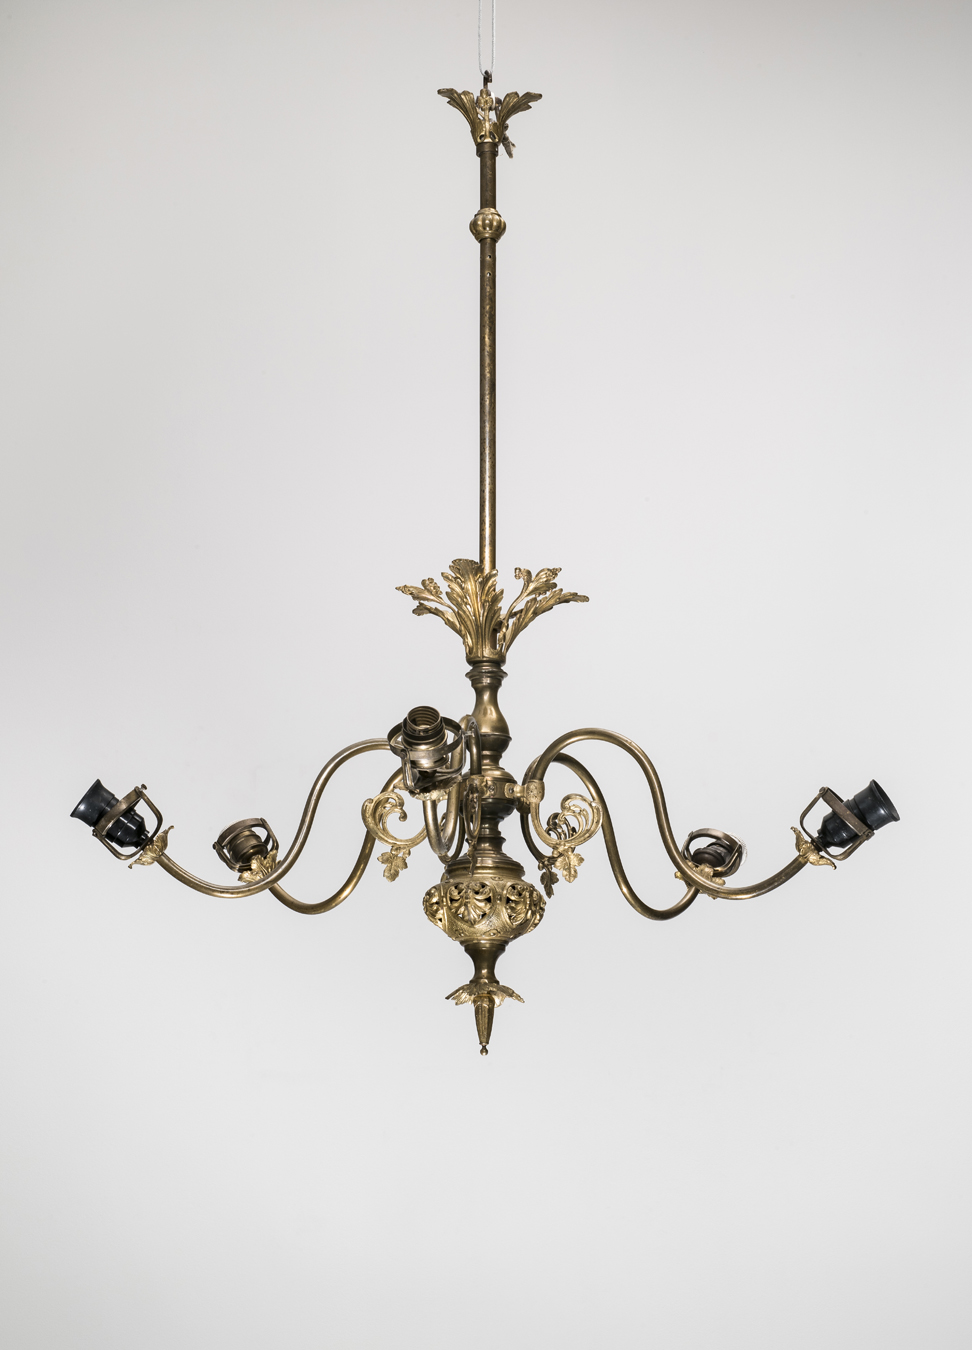 Chandelier, the early 20th c., the National Museum of Lithuania, IM-7980. Photo by Kęstutis Stoškus, 2019